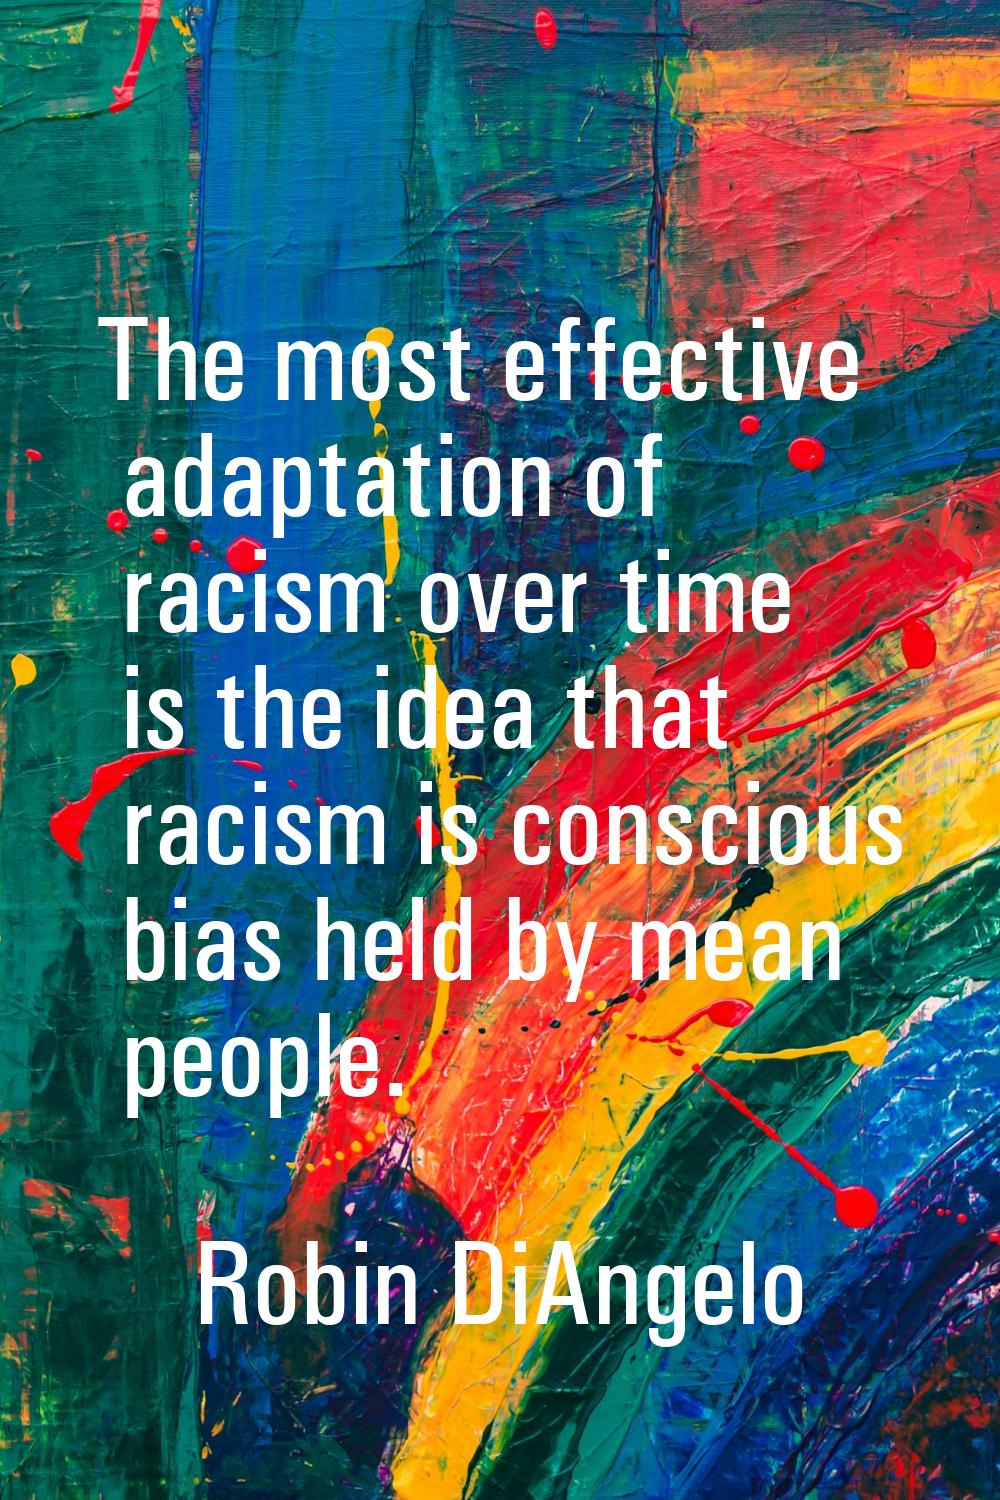 The most effective adaptation of racism over time is the idea that racism is conscious bias held by